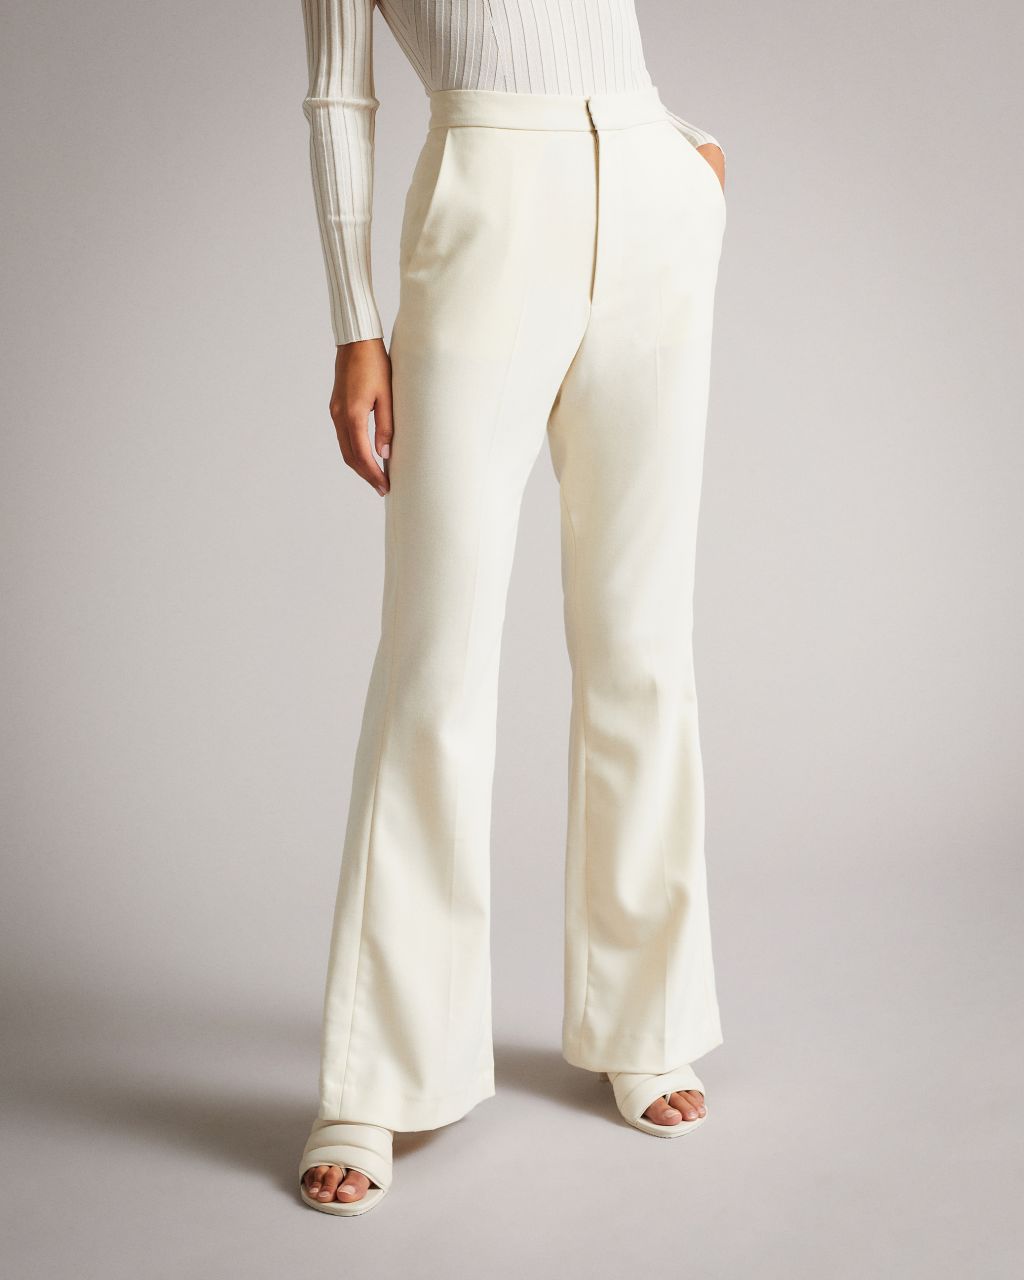 Wide leg trousers with half-slits